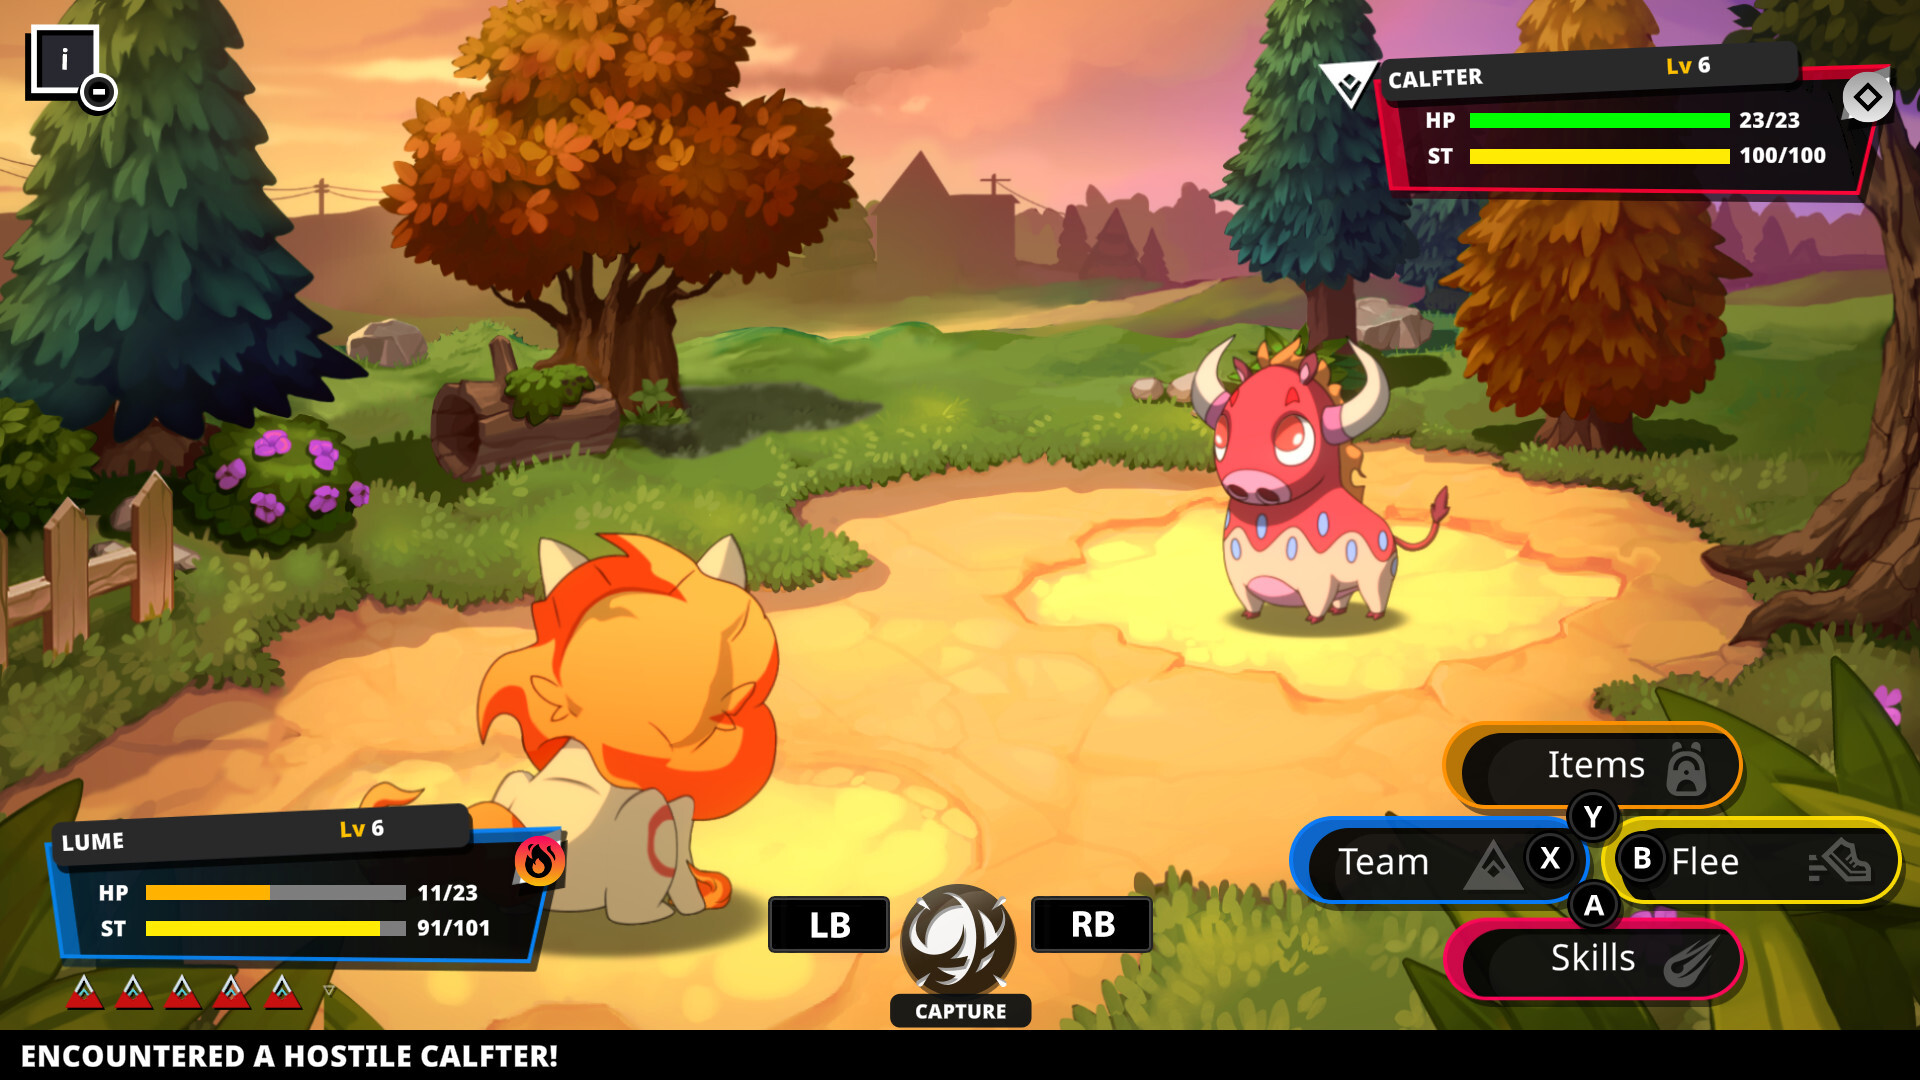 Pokémon games for PC – here are our favourite alternatives